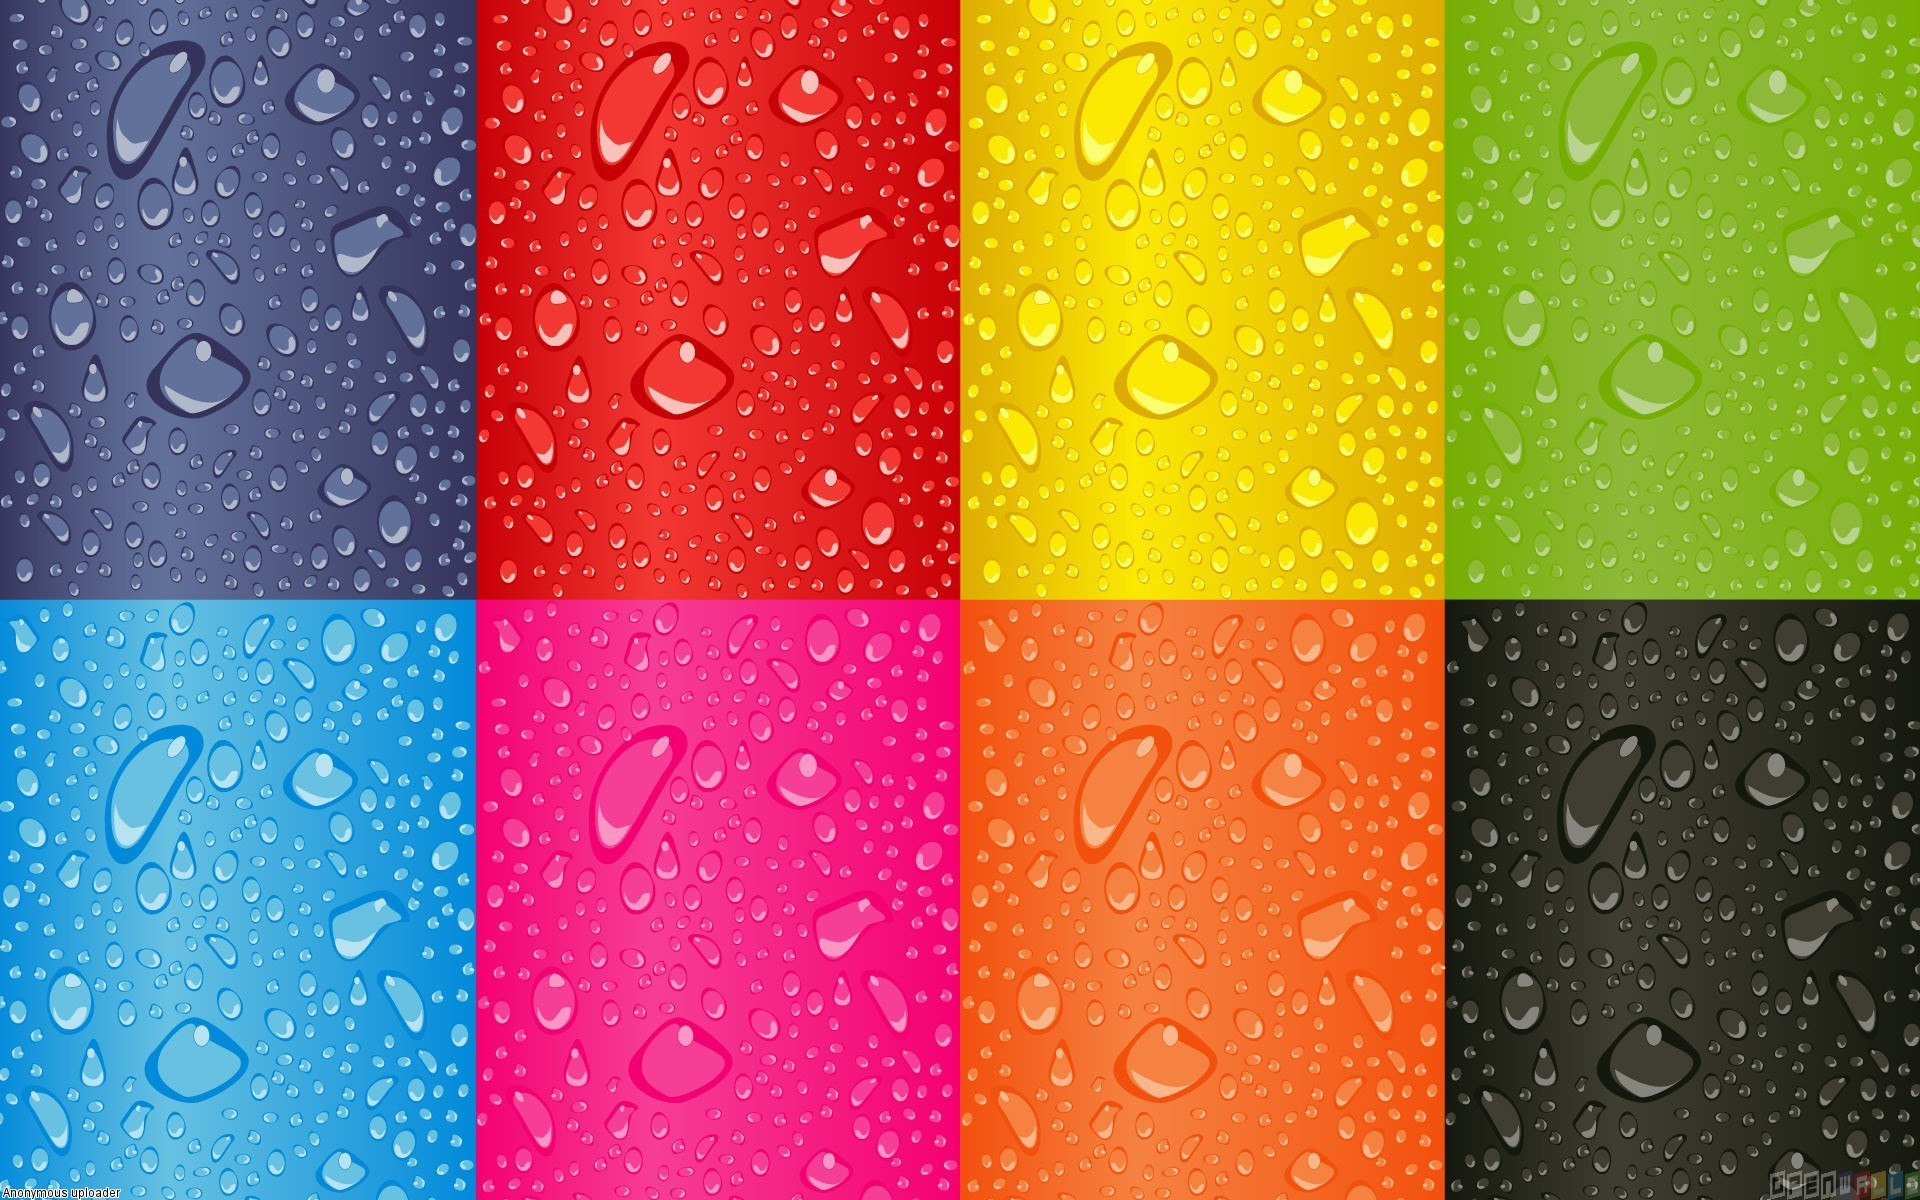 Drops on a colorful wall wallpaper #4997 - Open Walls